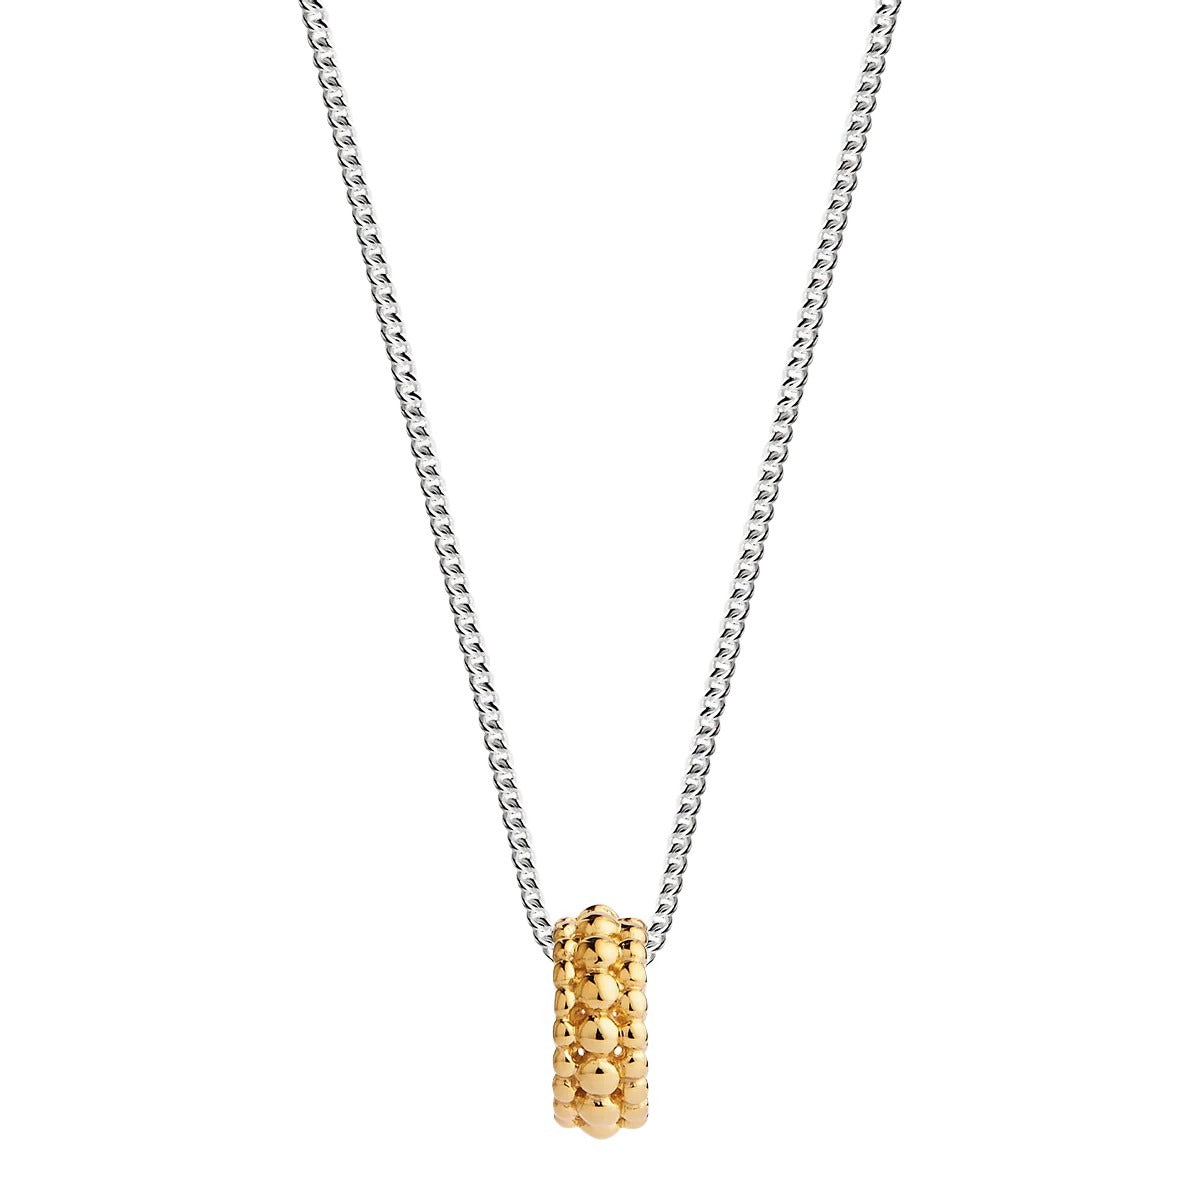 Najo N6837 Chia Two-Tone Necklace - Silver + Gold